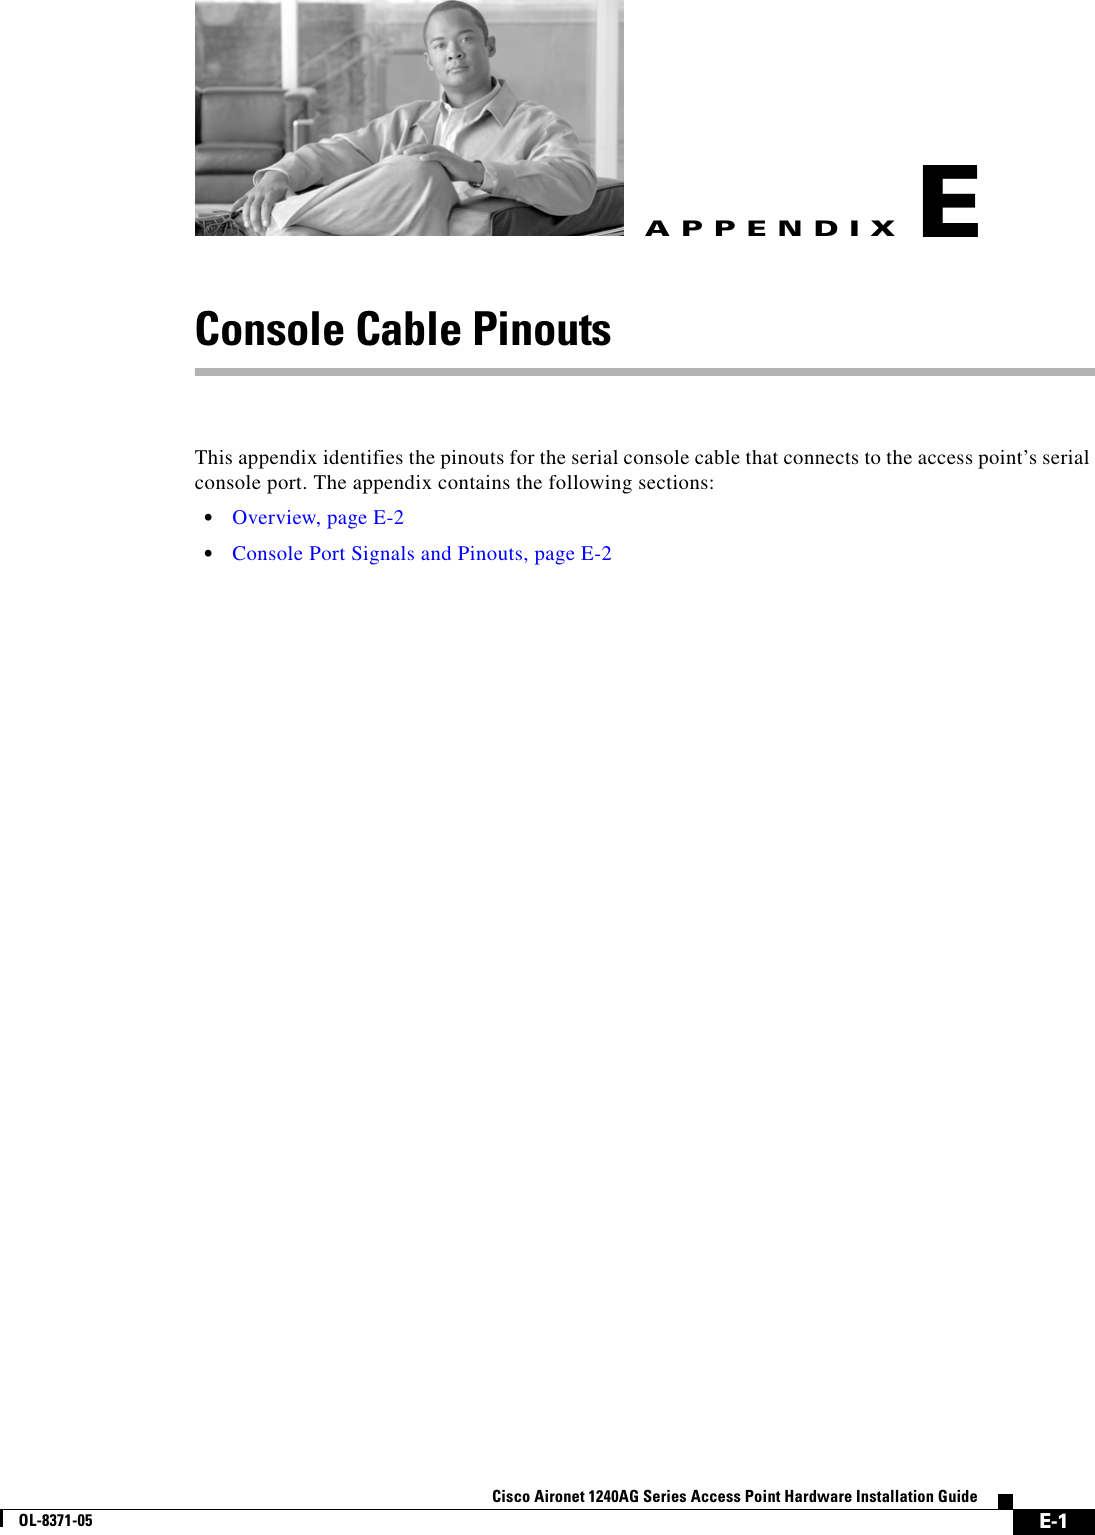  E-1Cisco Aironet 1240AG Series Access Point Hardware Installation GuideOL-8371-05APPENDIXEConsole Cable PinoutsThis appendix identifies the pinouts for the serial console cable that connects to the access point’s serial console port. The appendix contains the following sections:•Overview, page E-2•Console Port Signals and Pinouts, page E-2